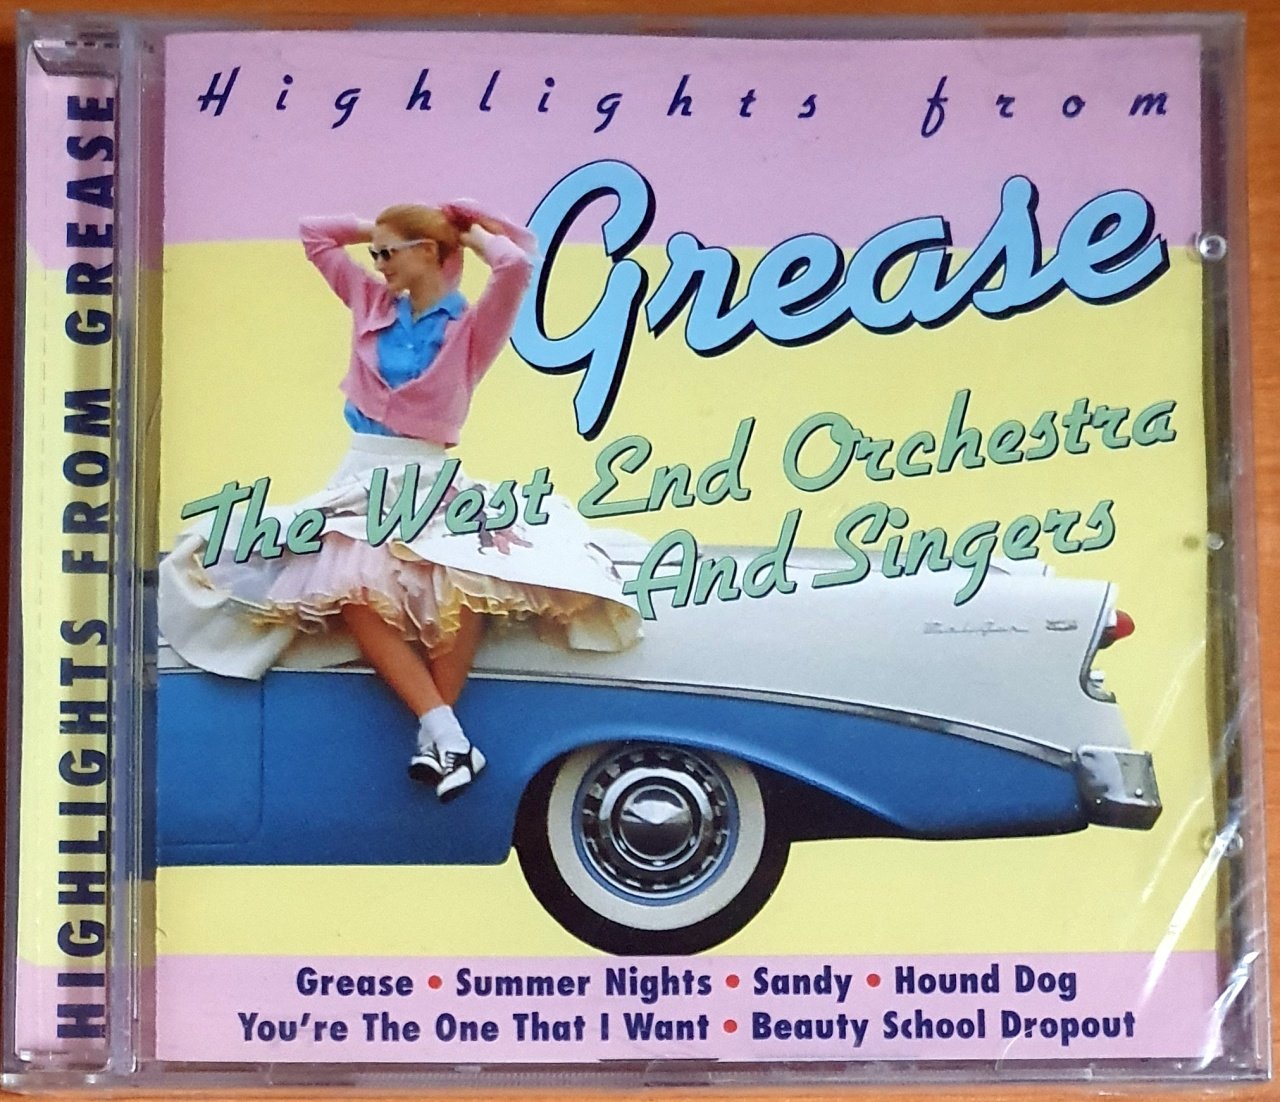 HIGHLIGHTS FROM GREASE SOUNDTRACK / THE WEST END ORCHESTRA AND SINGERS (1998) - CD SIFIR